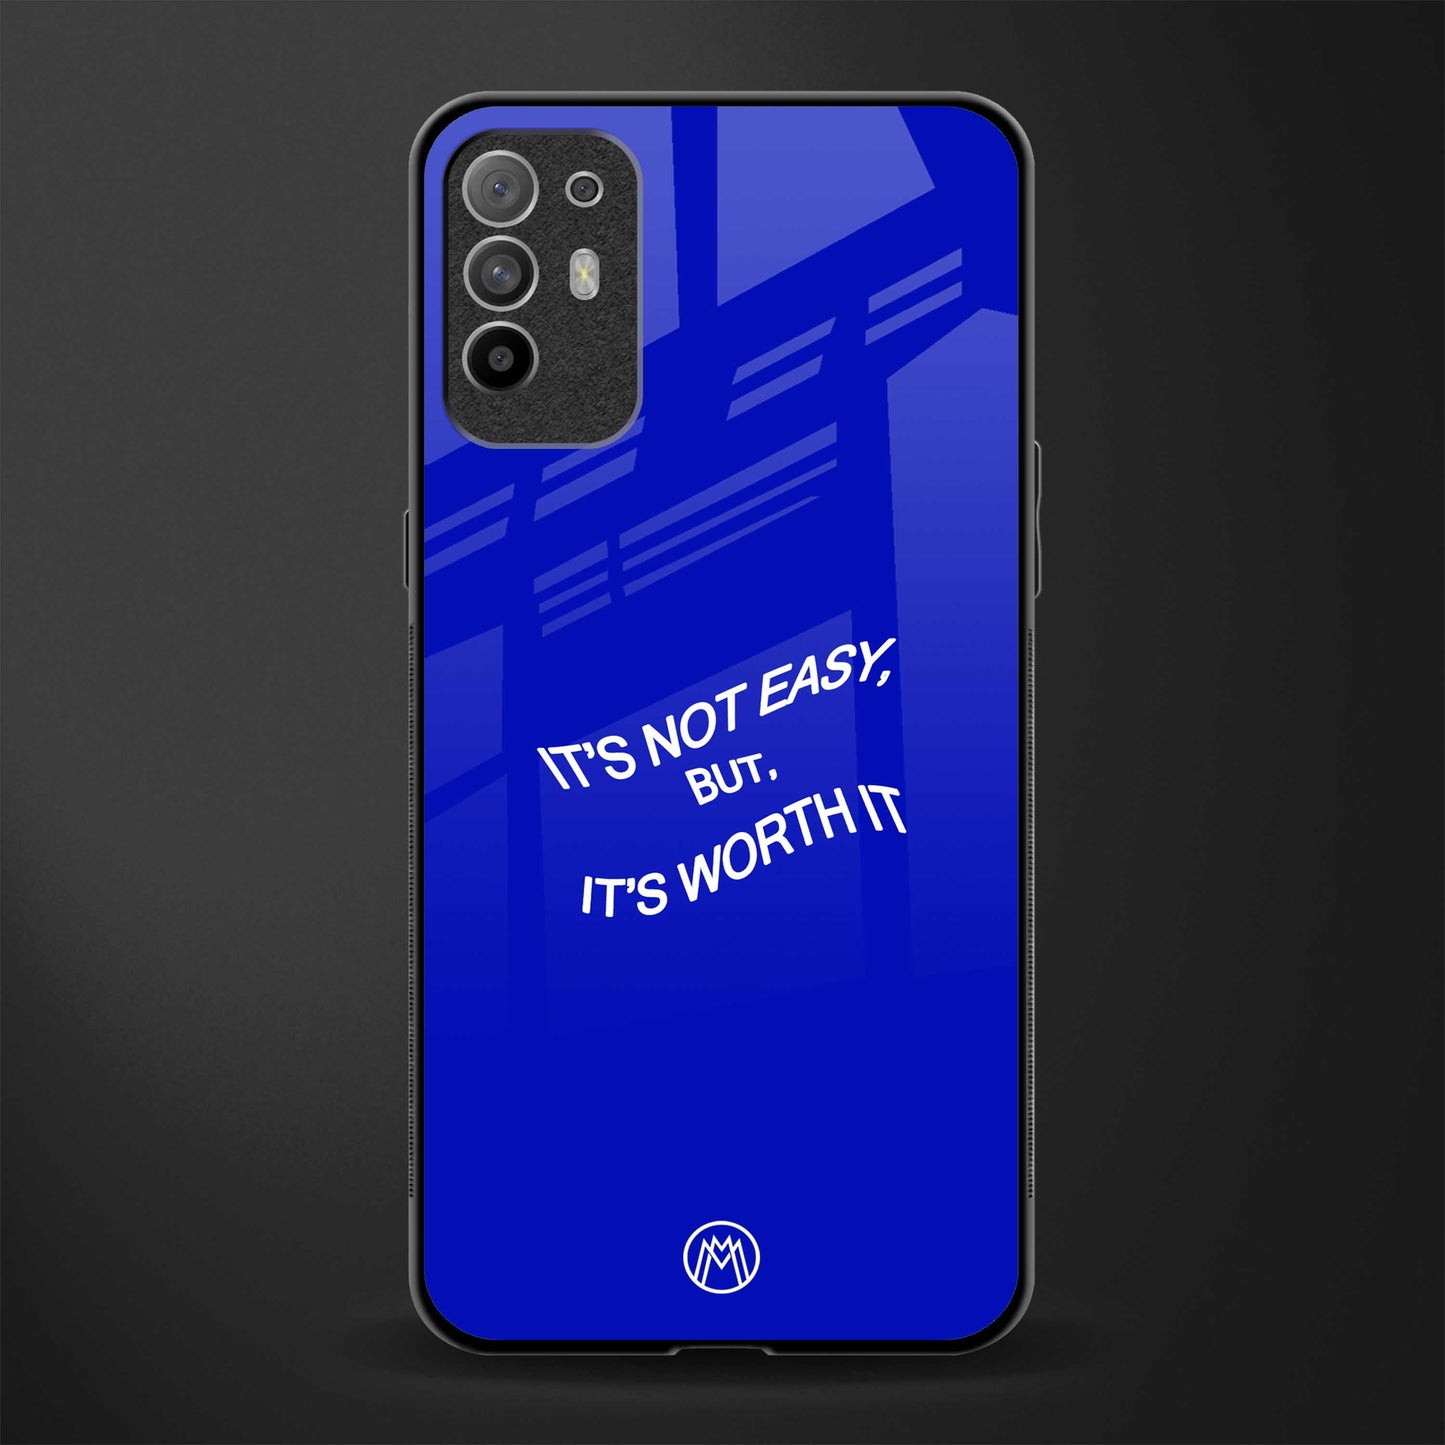 worth it glass case for oppo f19 pro plus image